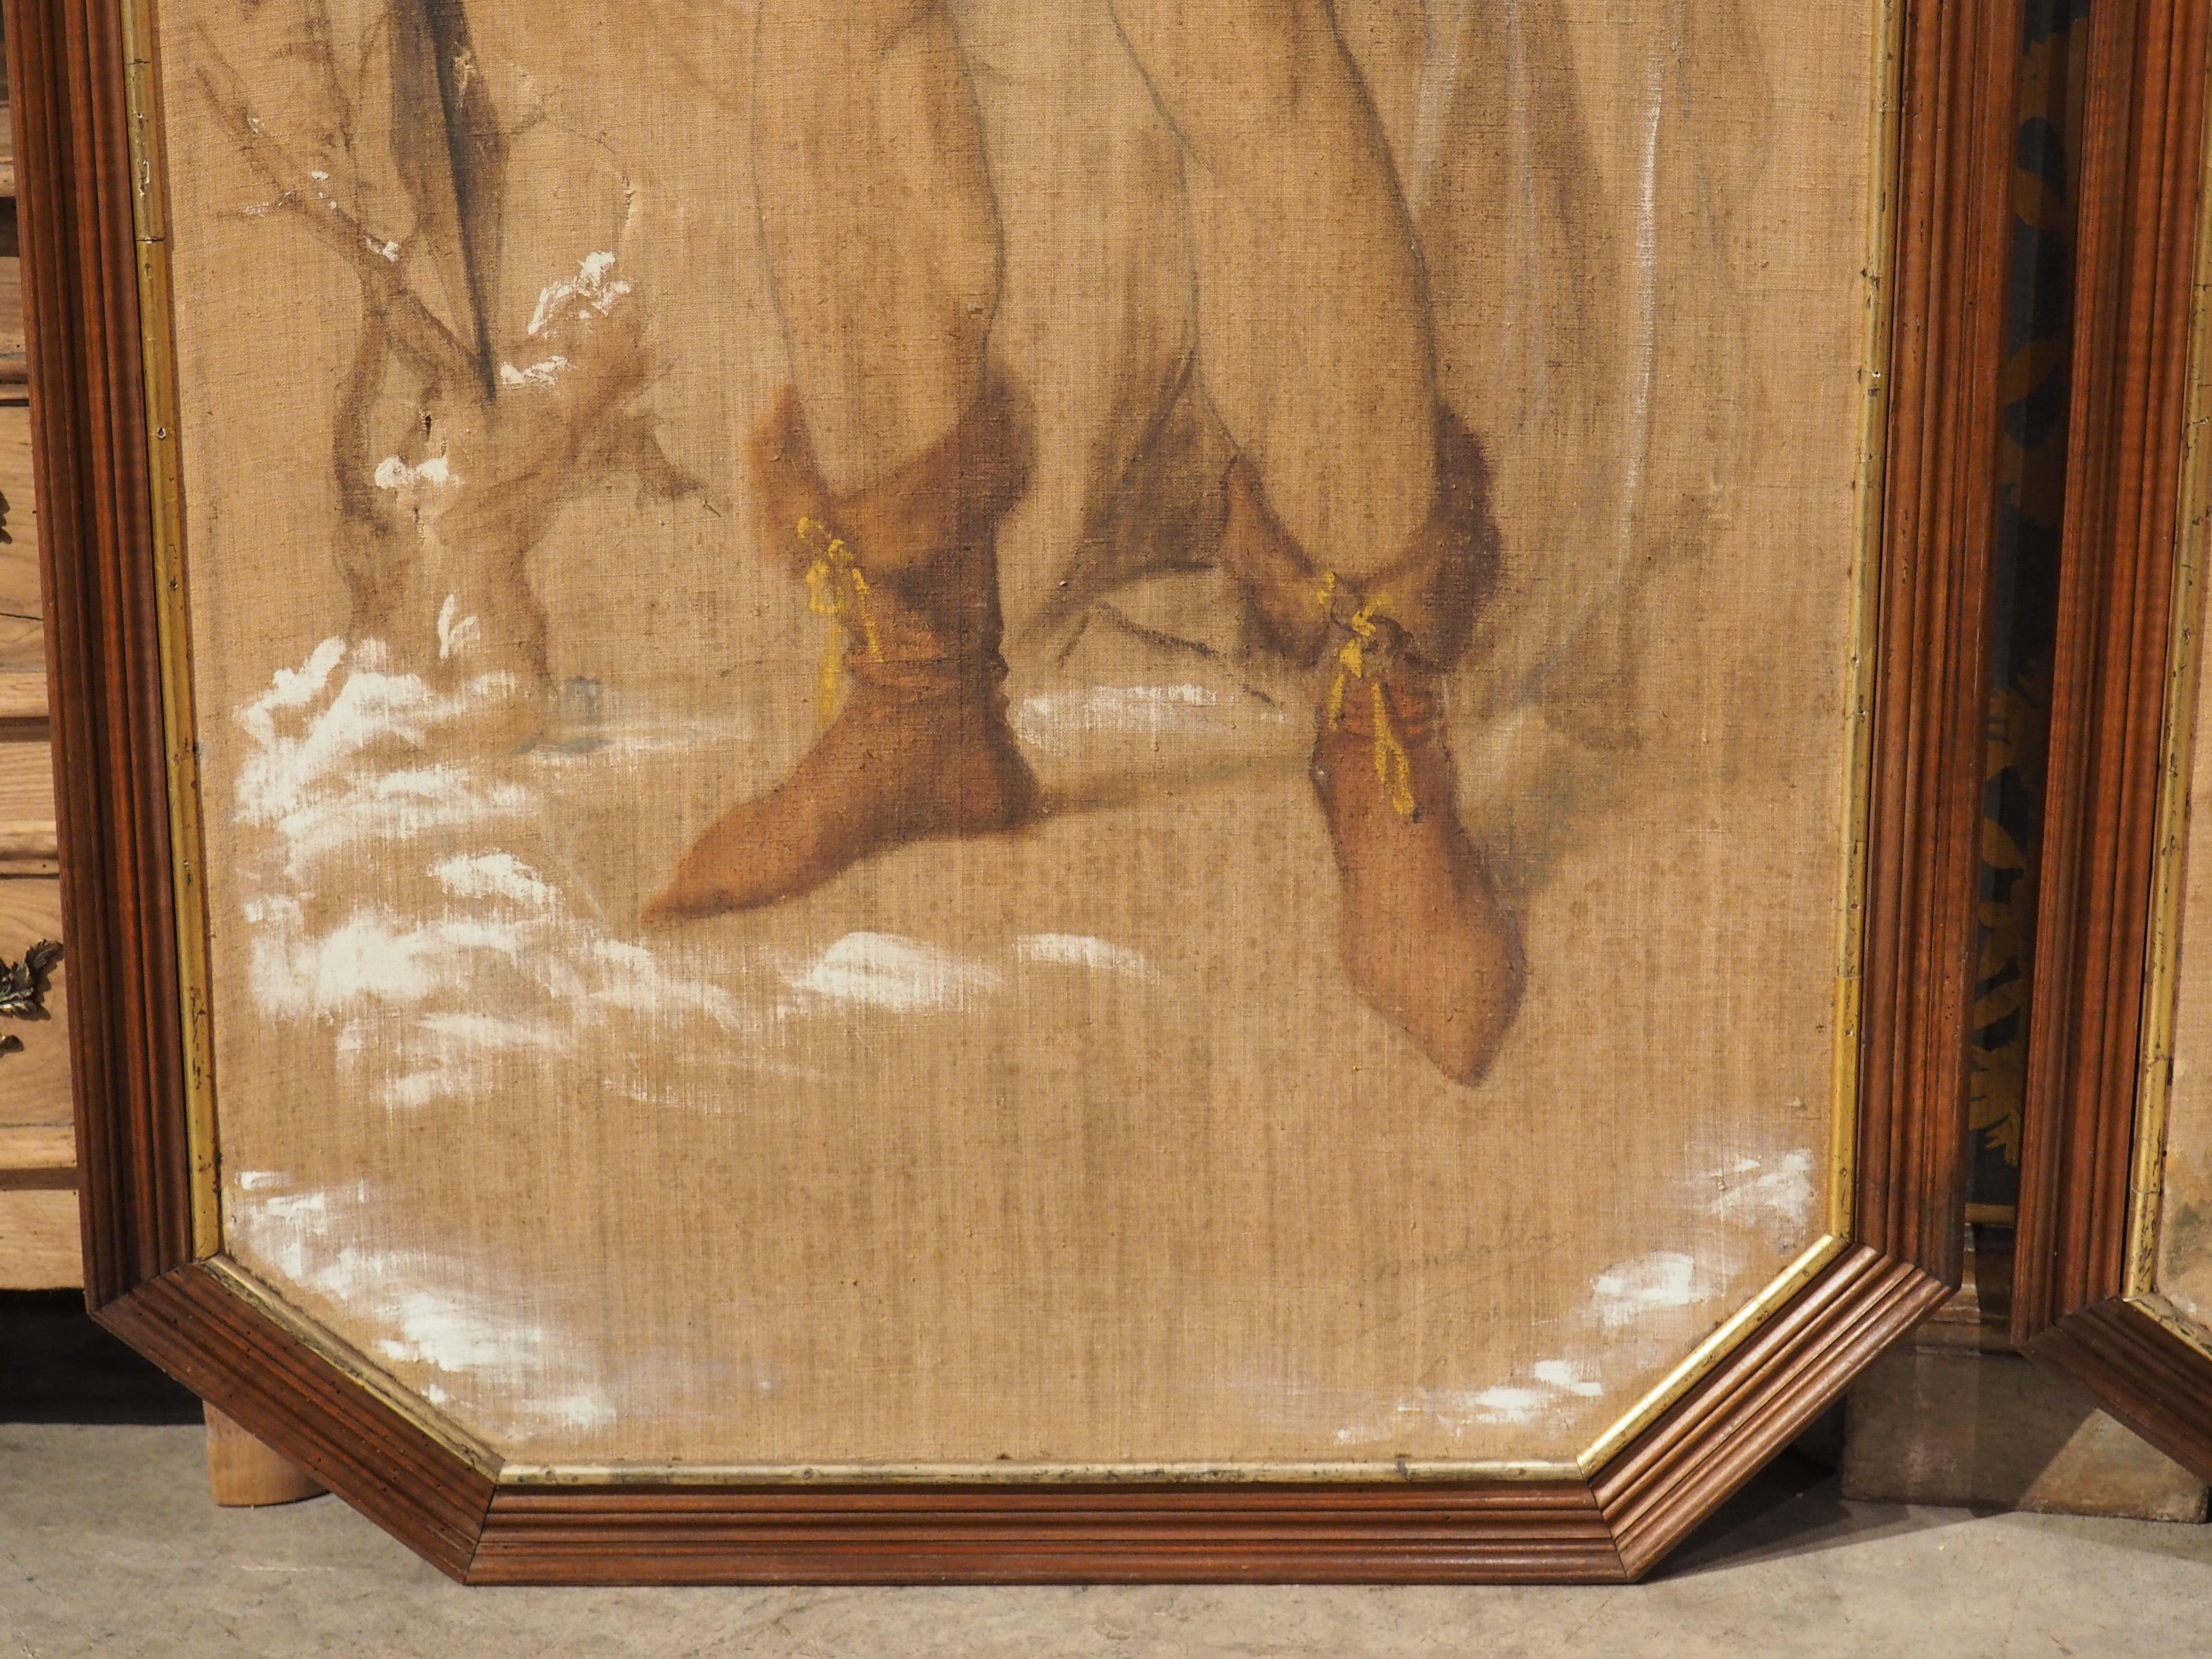 These tall canvas paintings, recently discovered in a chateau near Lille, France, are set within rectangular wood (walnut) frames with canted corners and multiple layers of molding, including a gilded innermost border. Signed and dated 1879 (the